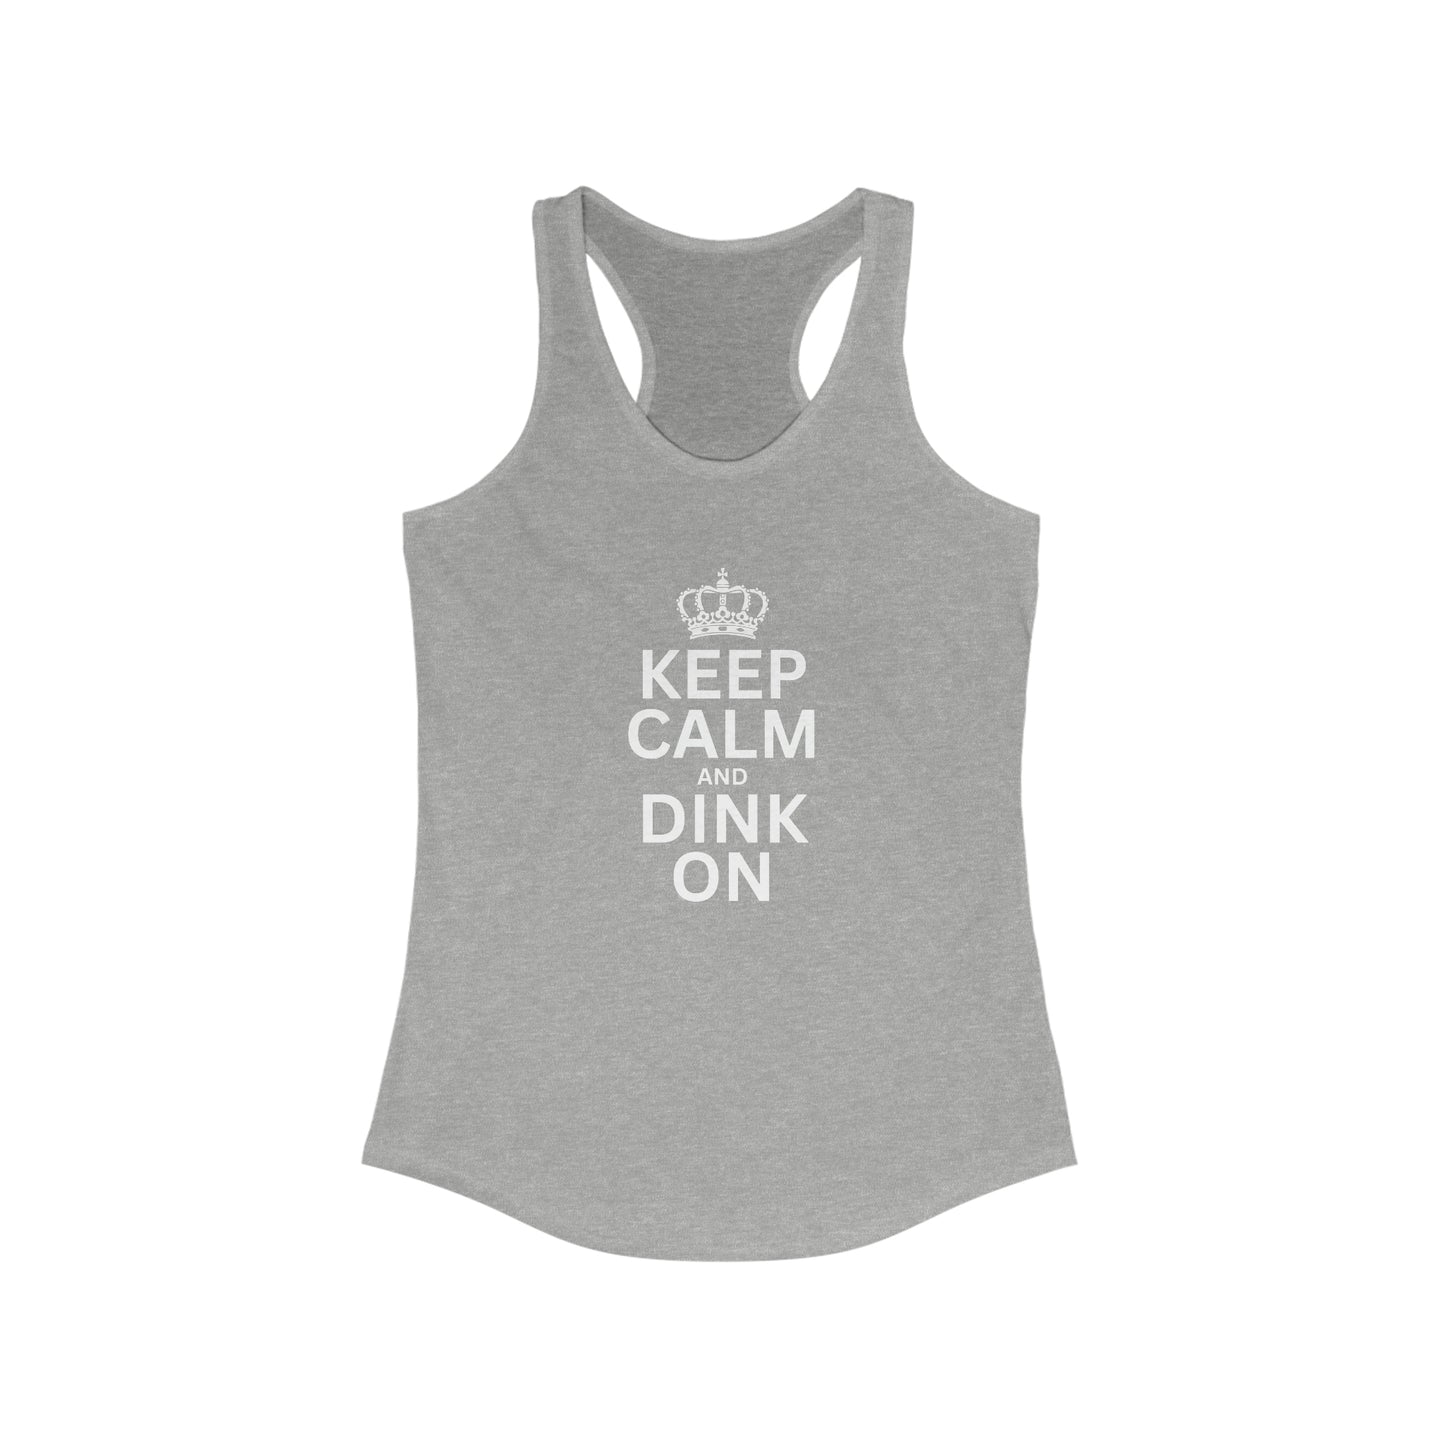 Keep Calm and Dink On Racerback